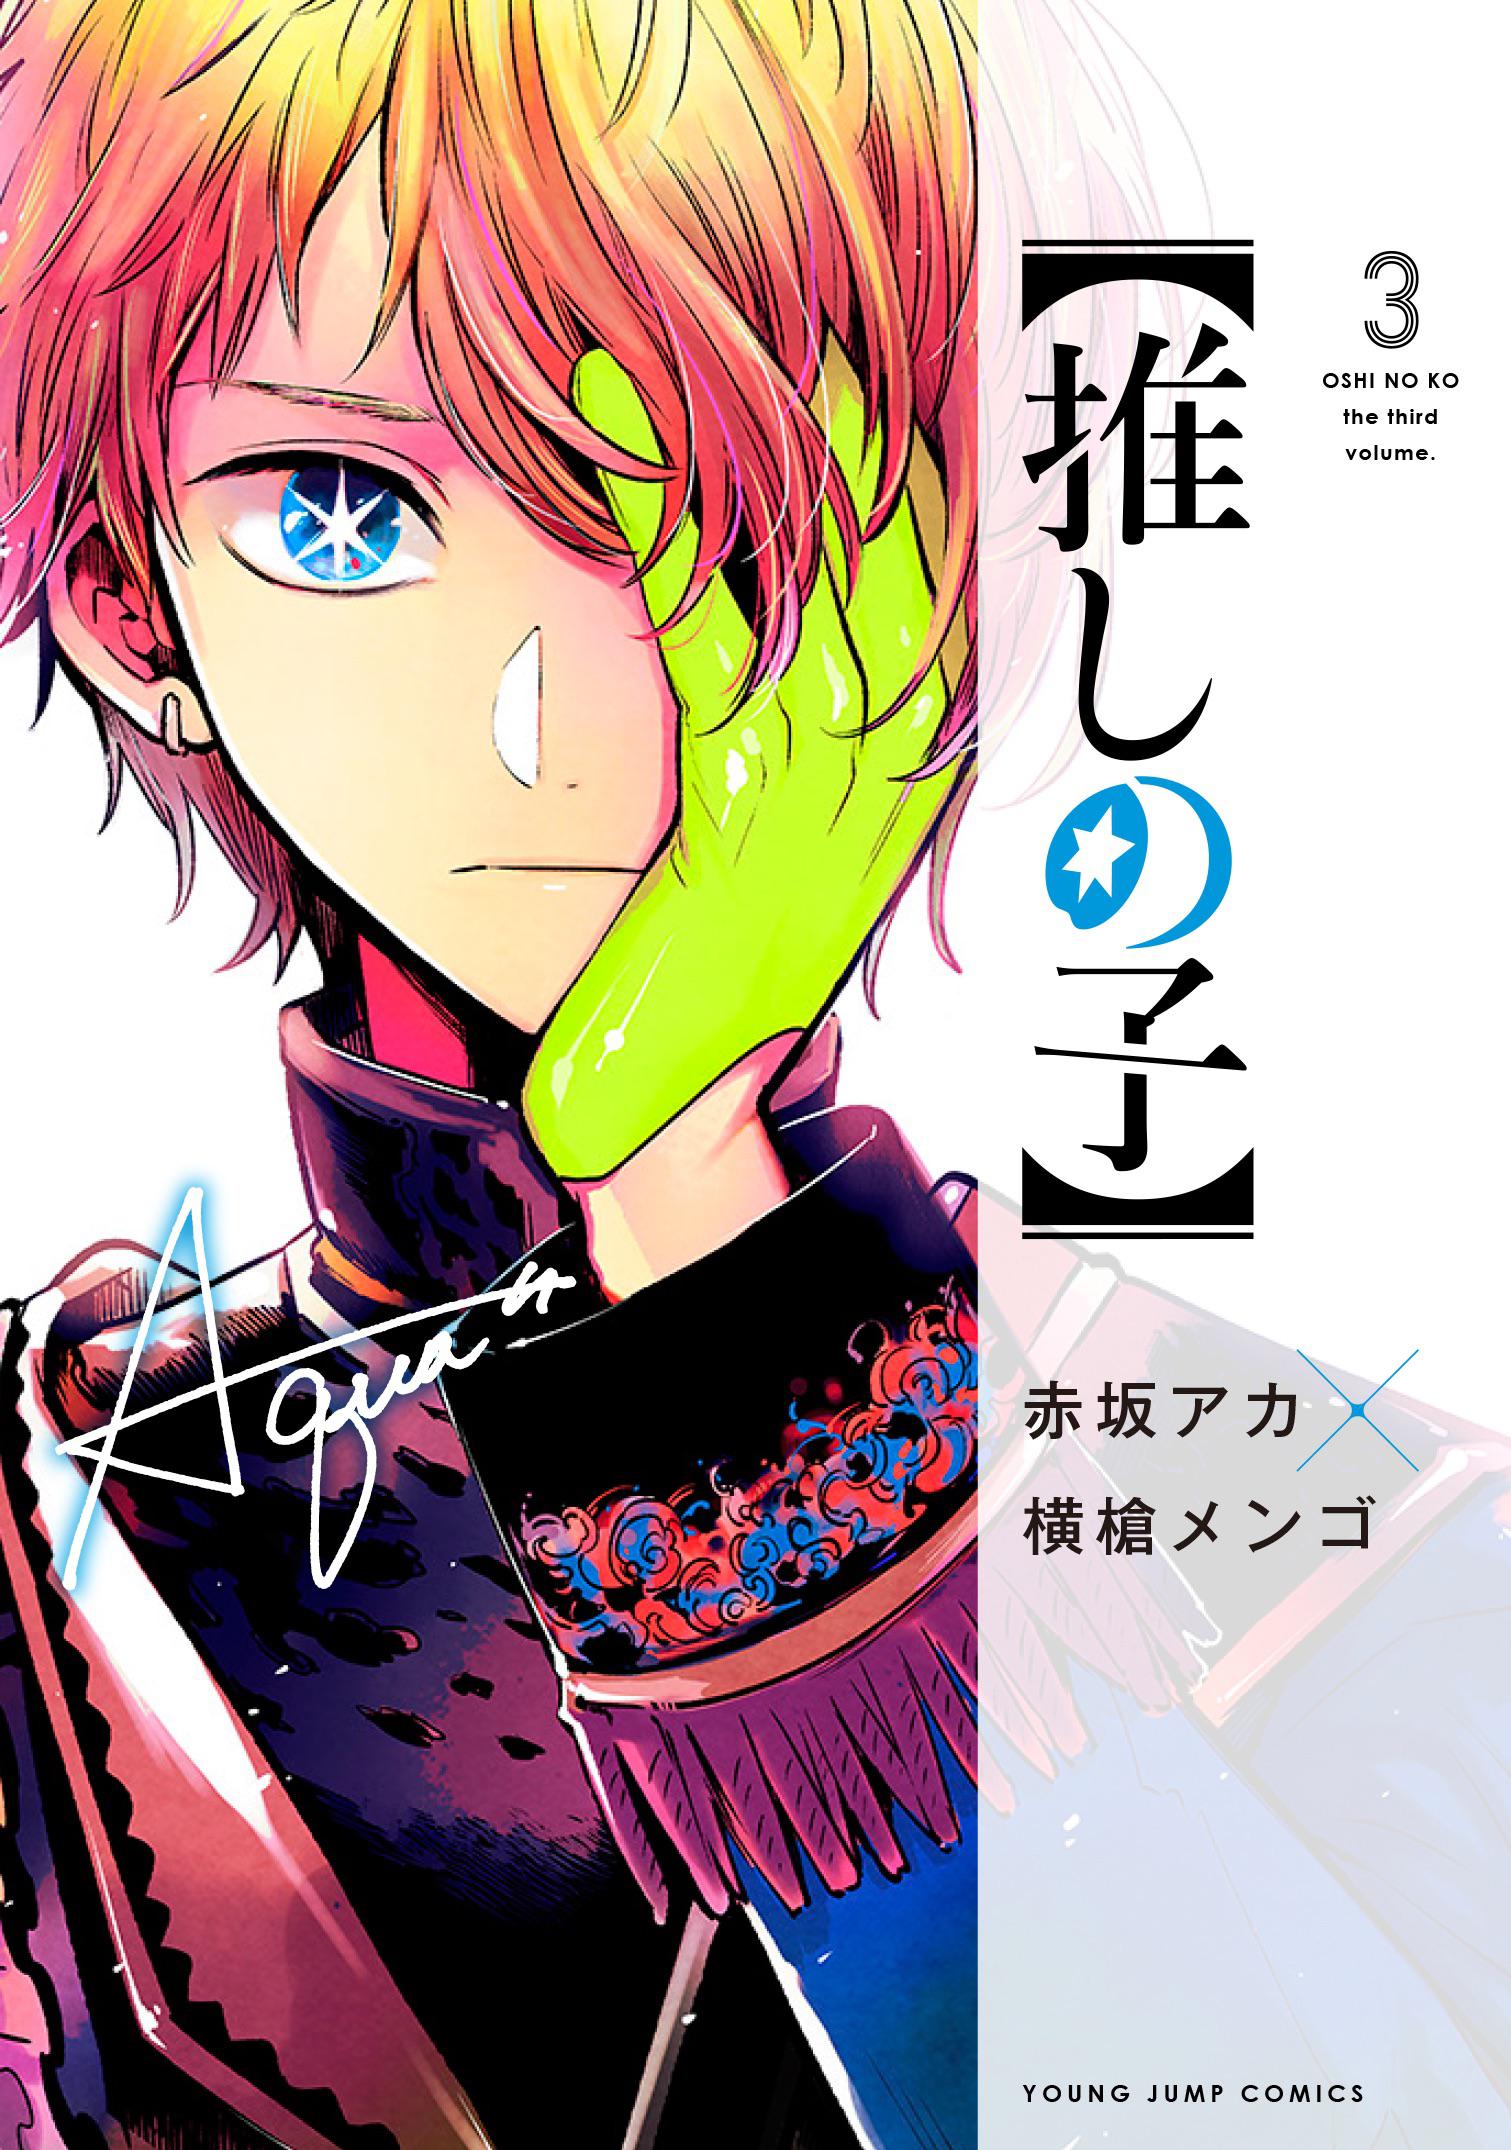 Oshi no Ko chapter 129: Release date, time, what to expect, and more